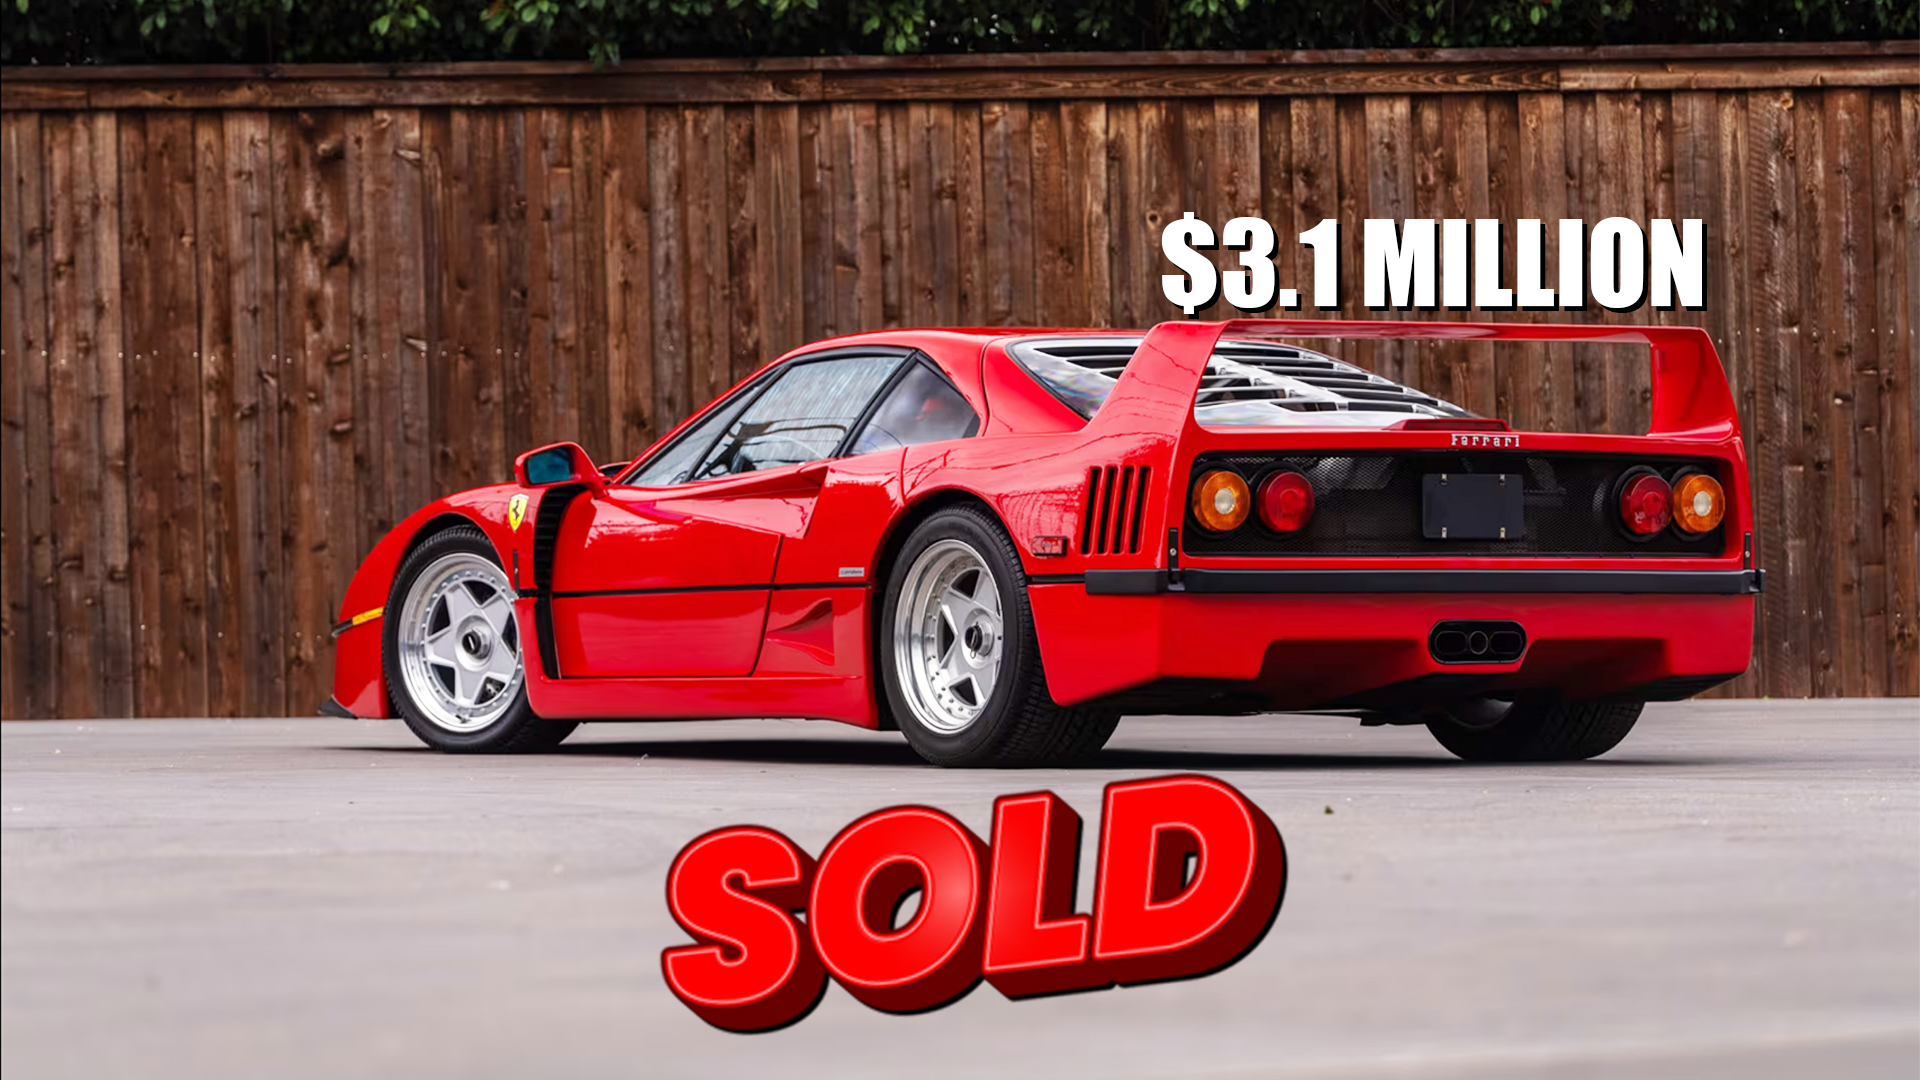 This Ferrari F40 Went From 0 to $1 Mil in Less Than 2 Seconds and Then Sold  for $3.1 Mil. - autoevolution